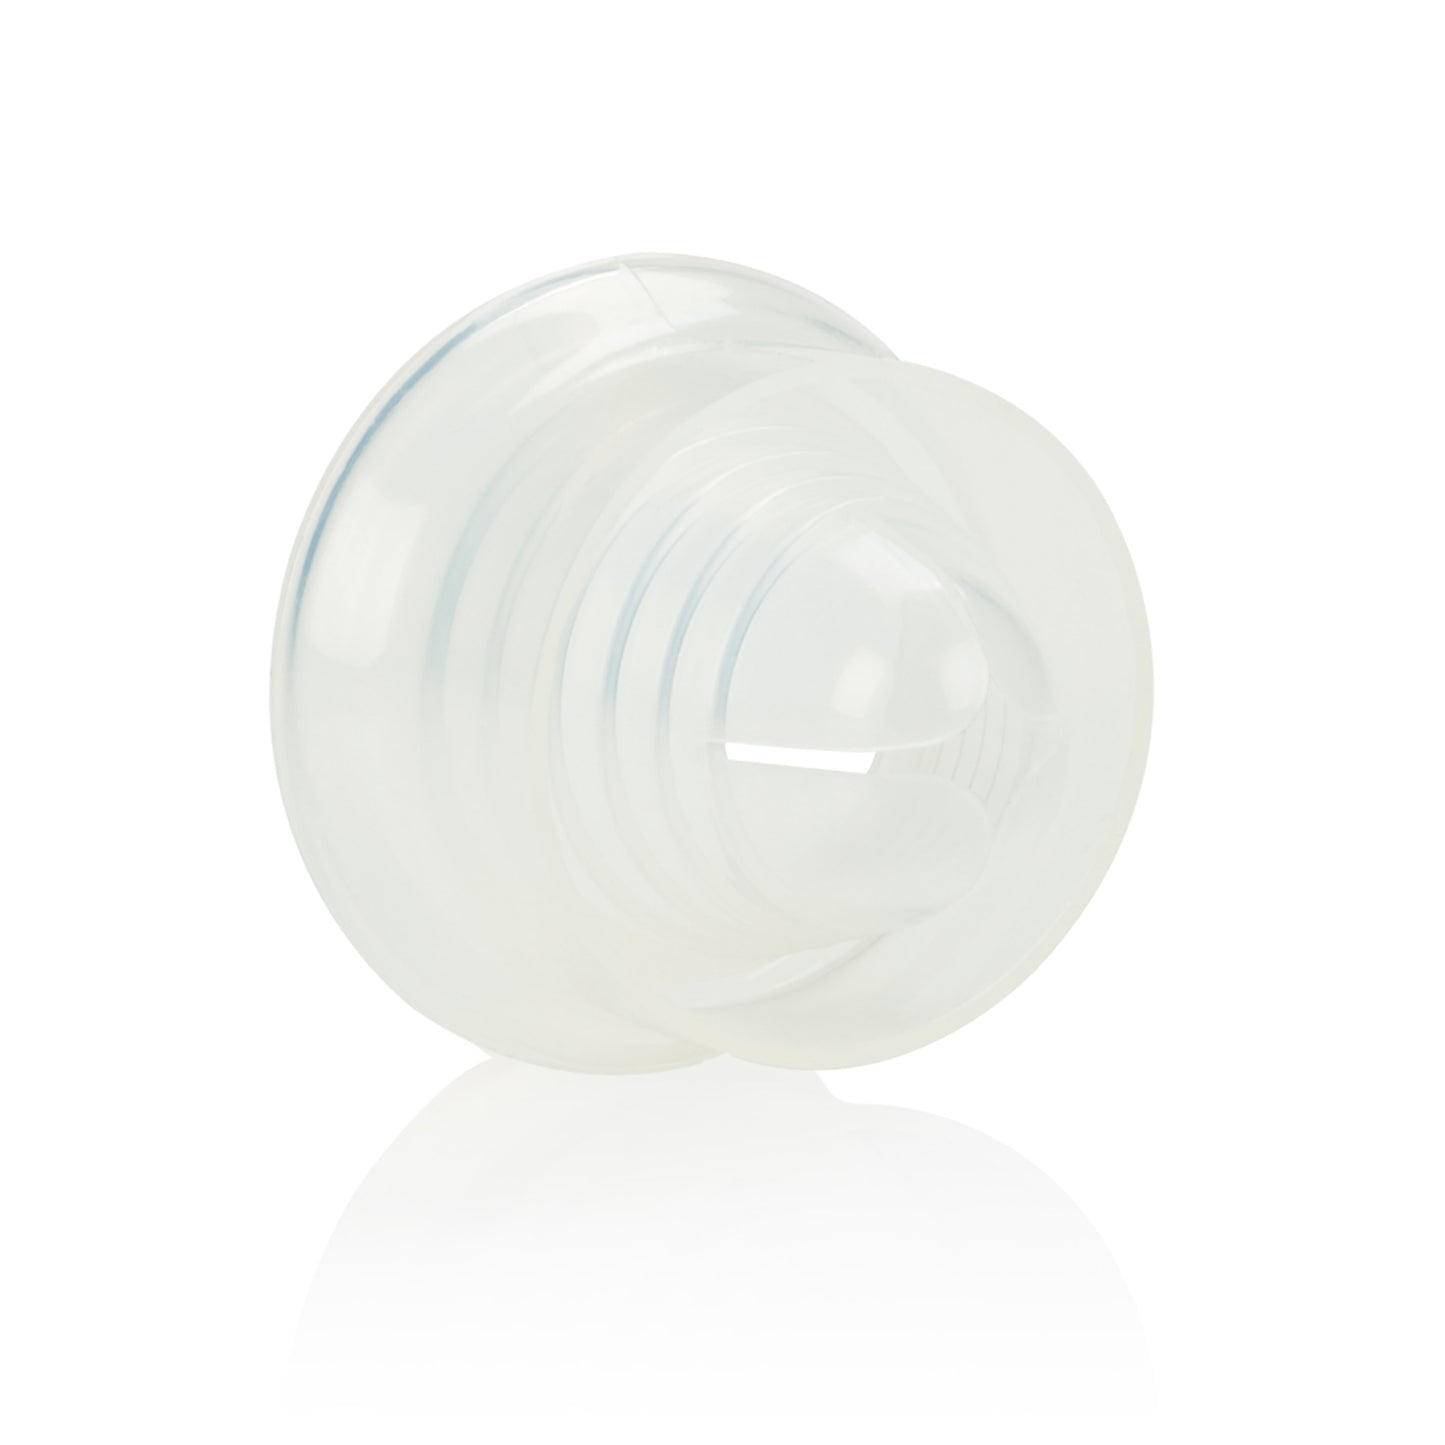 Universal Silicone Pump Sleeve - Clear SE1048002